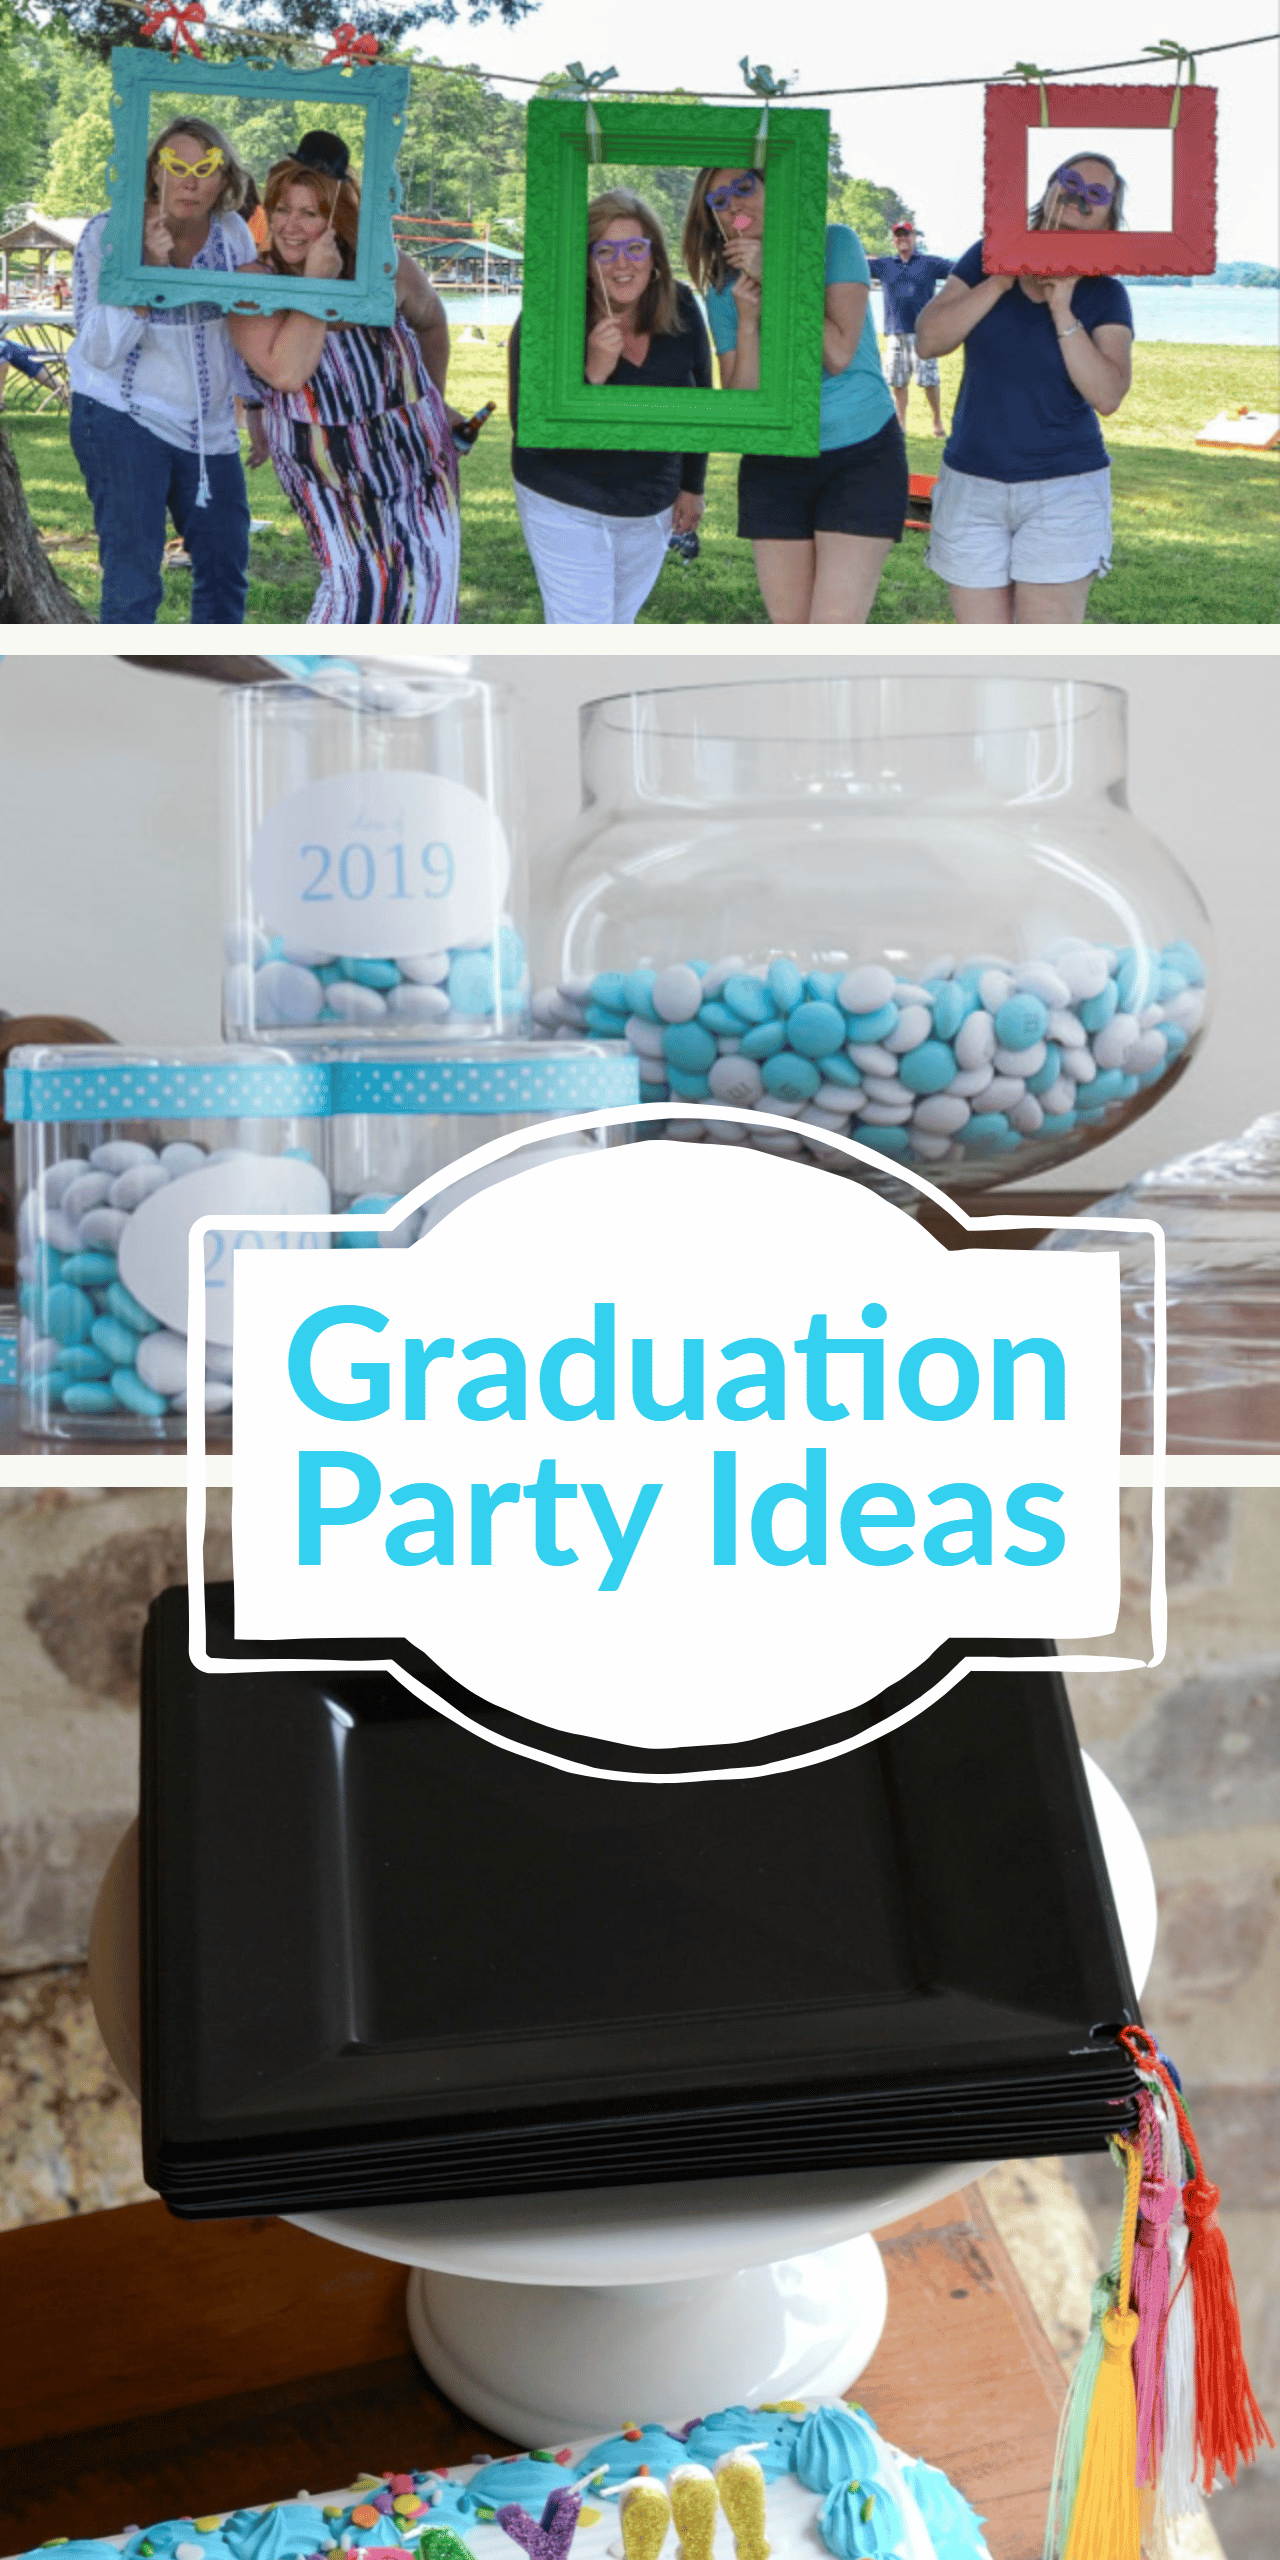 pin showing graduation party food and graduation party decoration and game ideas